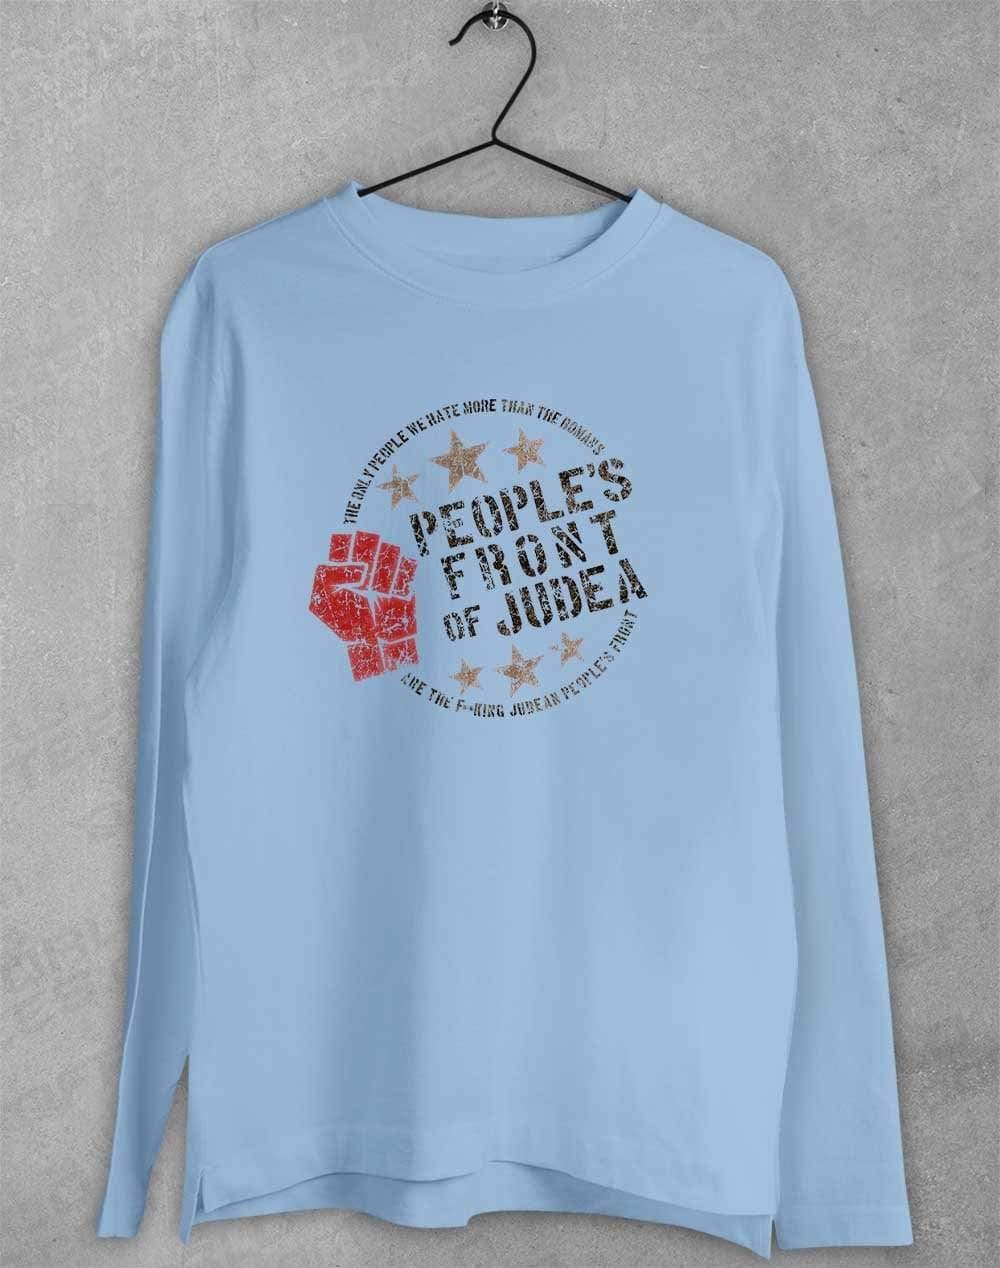 People's Front of Judea Long Sleeve T-Shirt S / Light Blue  - Off World Tees